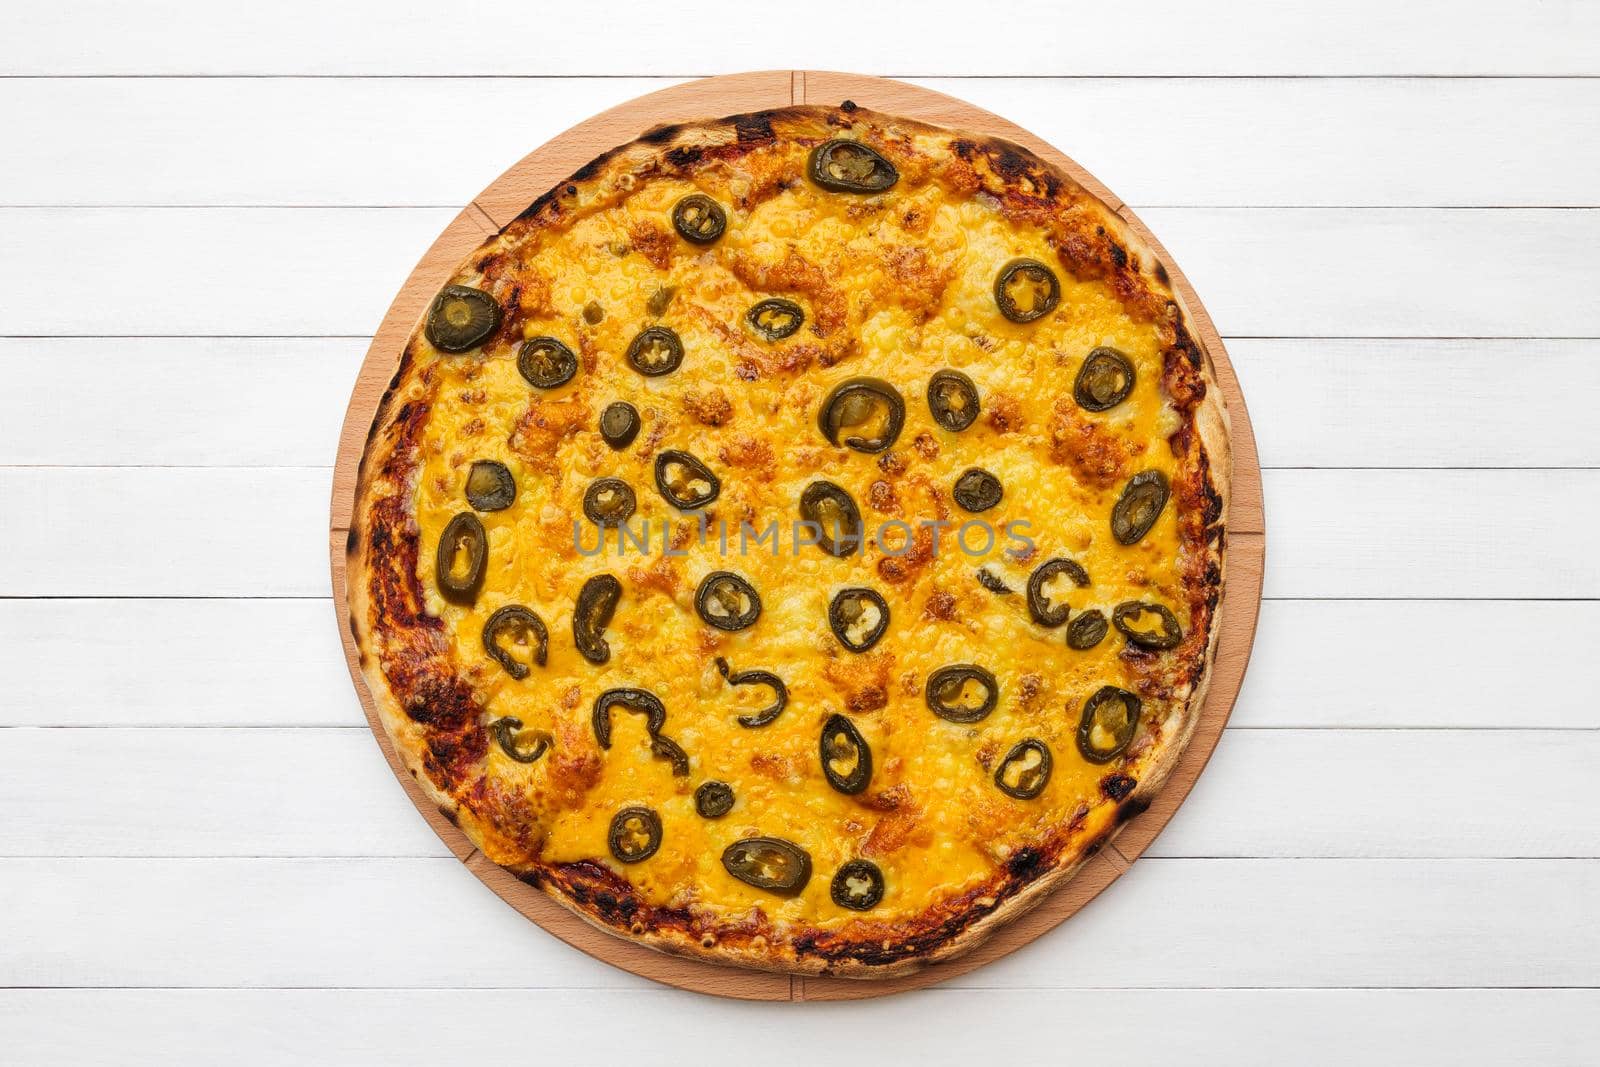 Whole round pizza topped with olives and cheese on wooden plate. Top view on white board background by apavlin